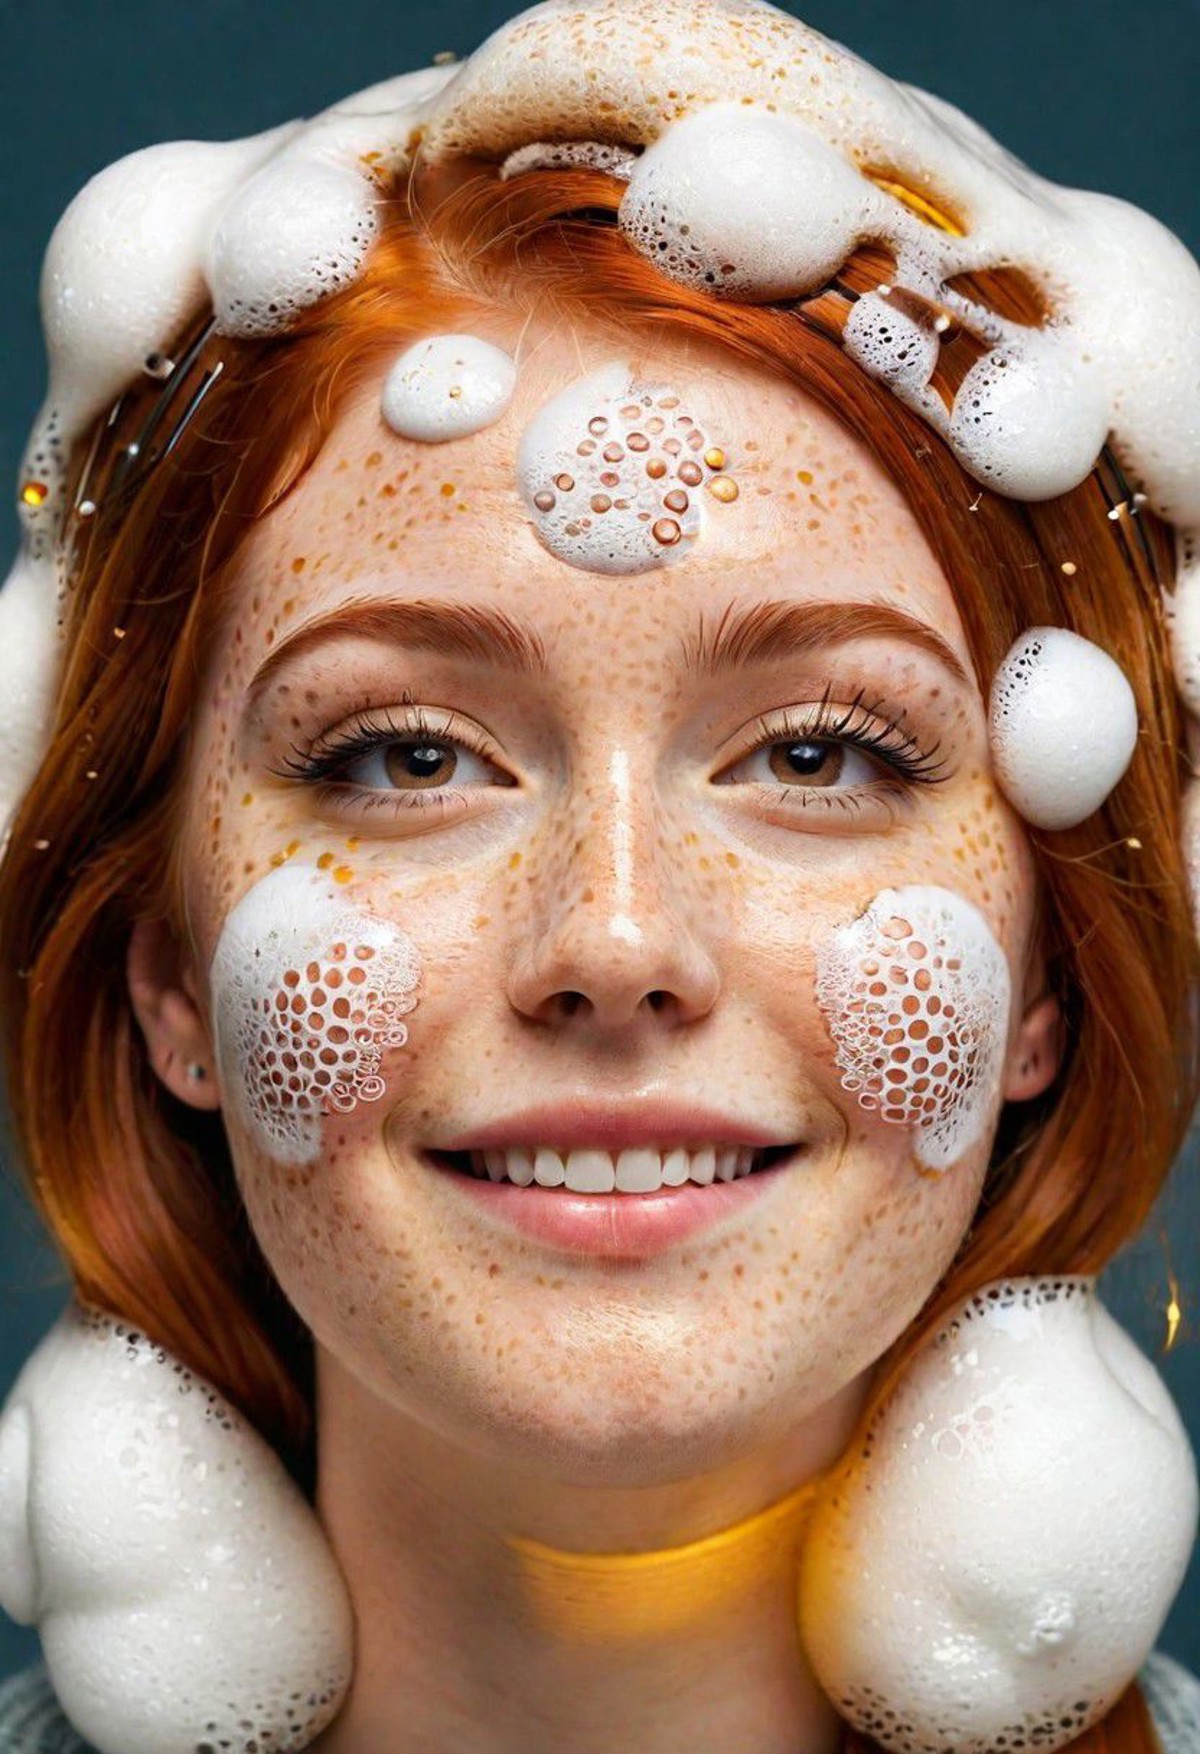 portrait photo of a redhead girl with freckles whose face is covered with splashes of beer foam ral-beer, eyes closed, smi...